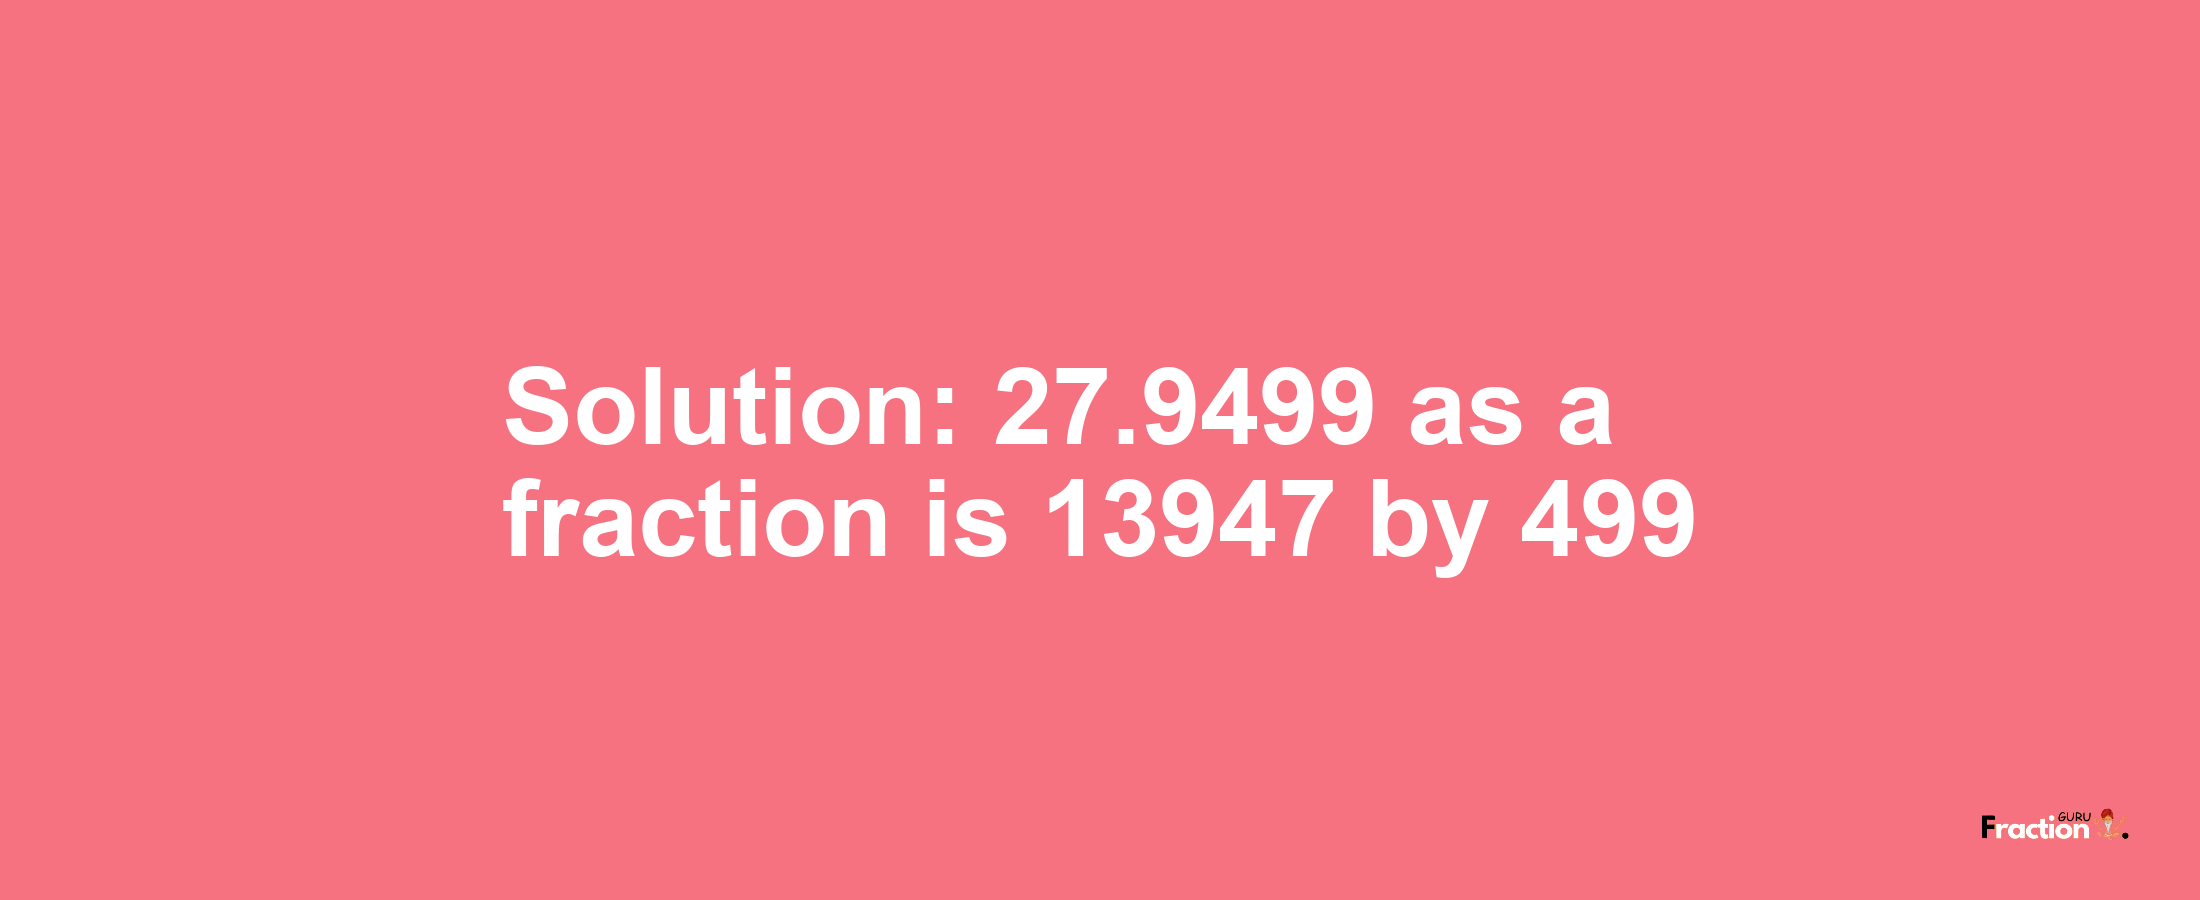 Solution:27.9499 as a fraction is 13947/499